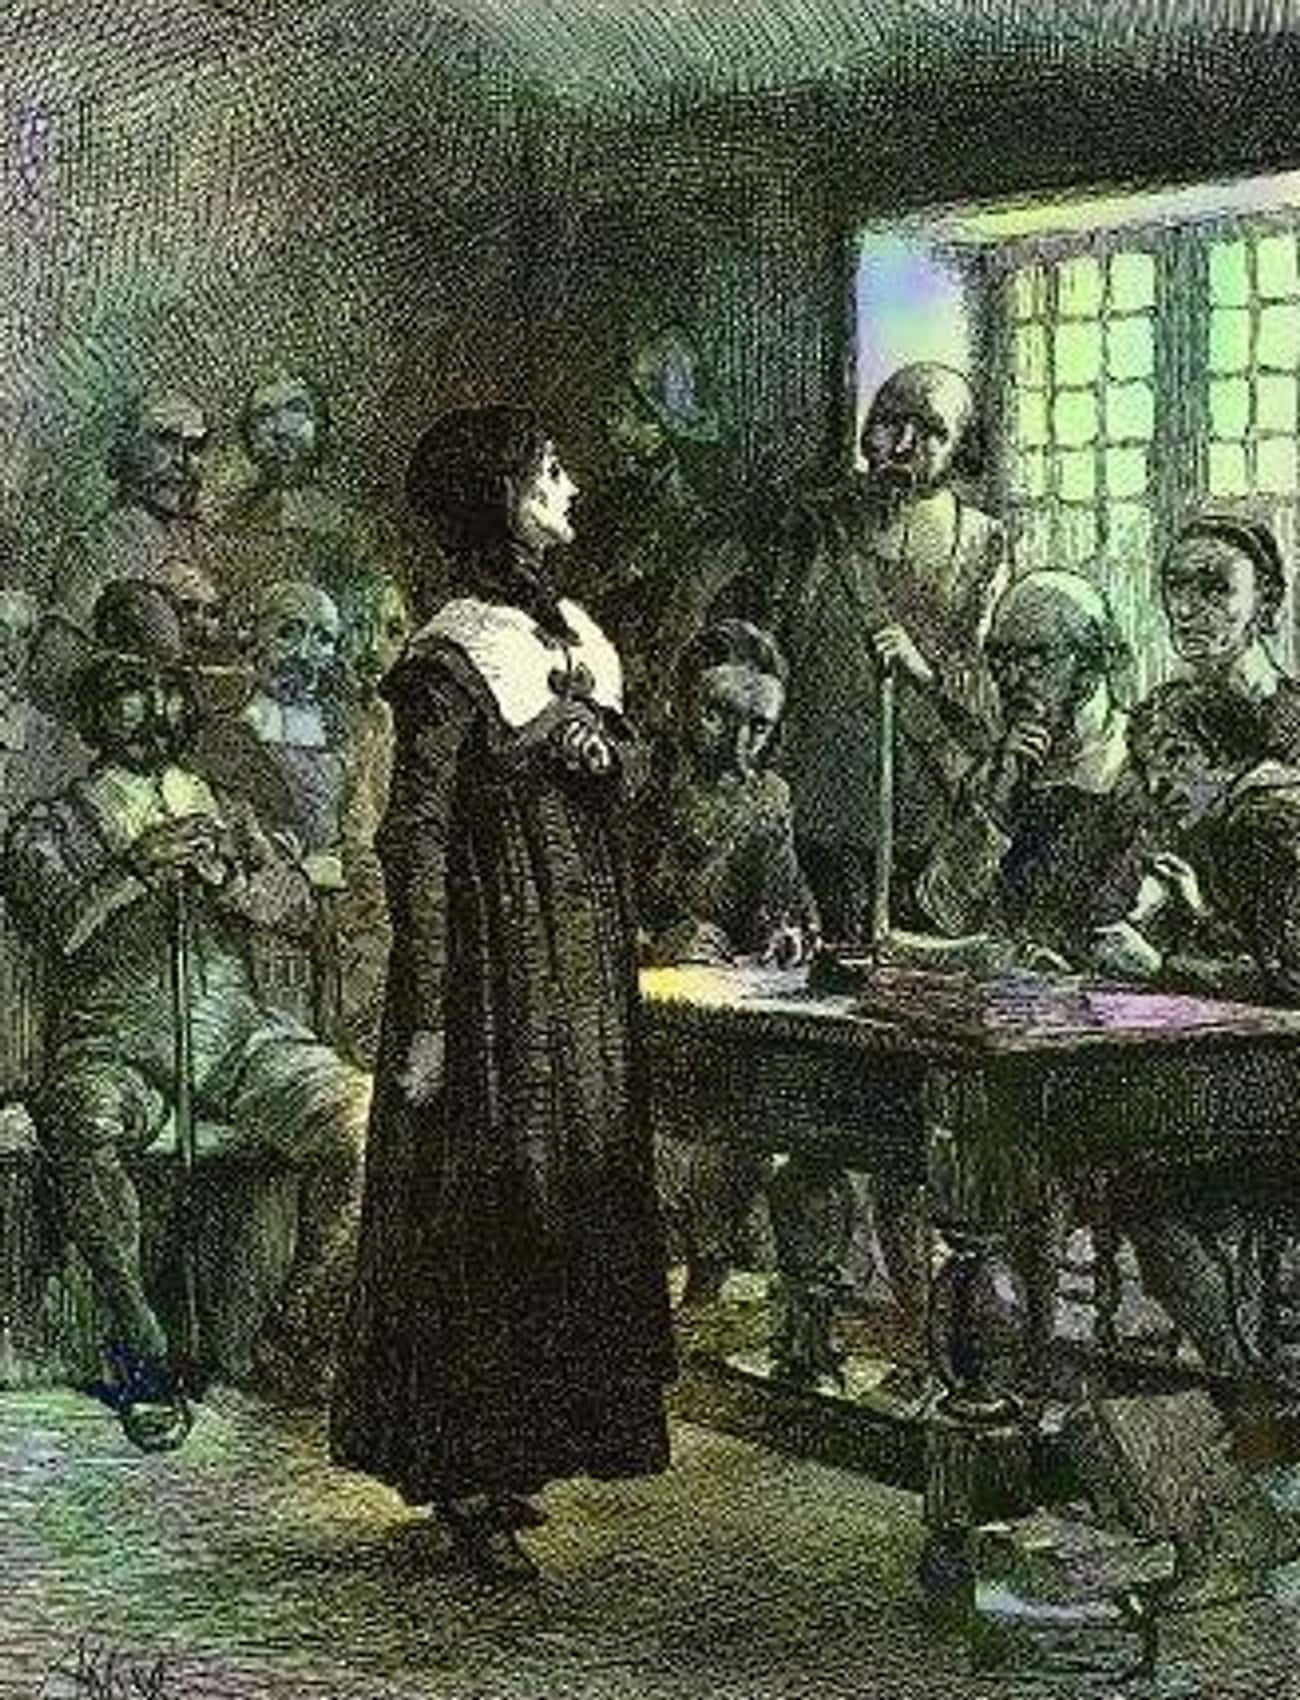 Anne Hutchinson Was A Revolutionary And Feminist Who Split From The Puritan Church